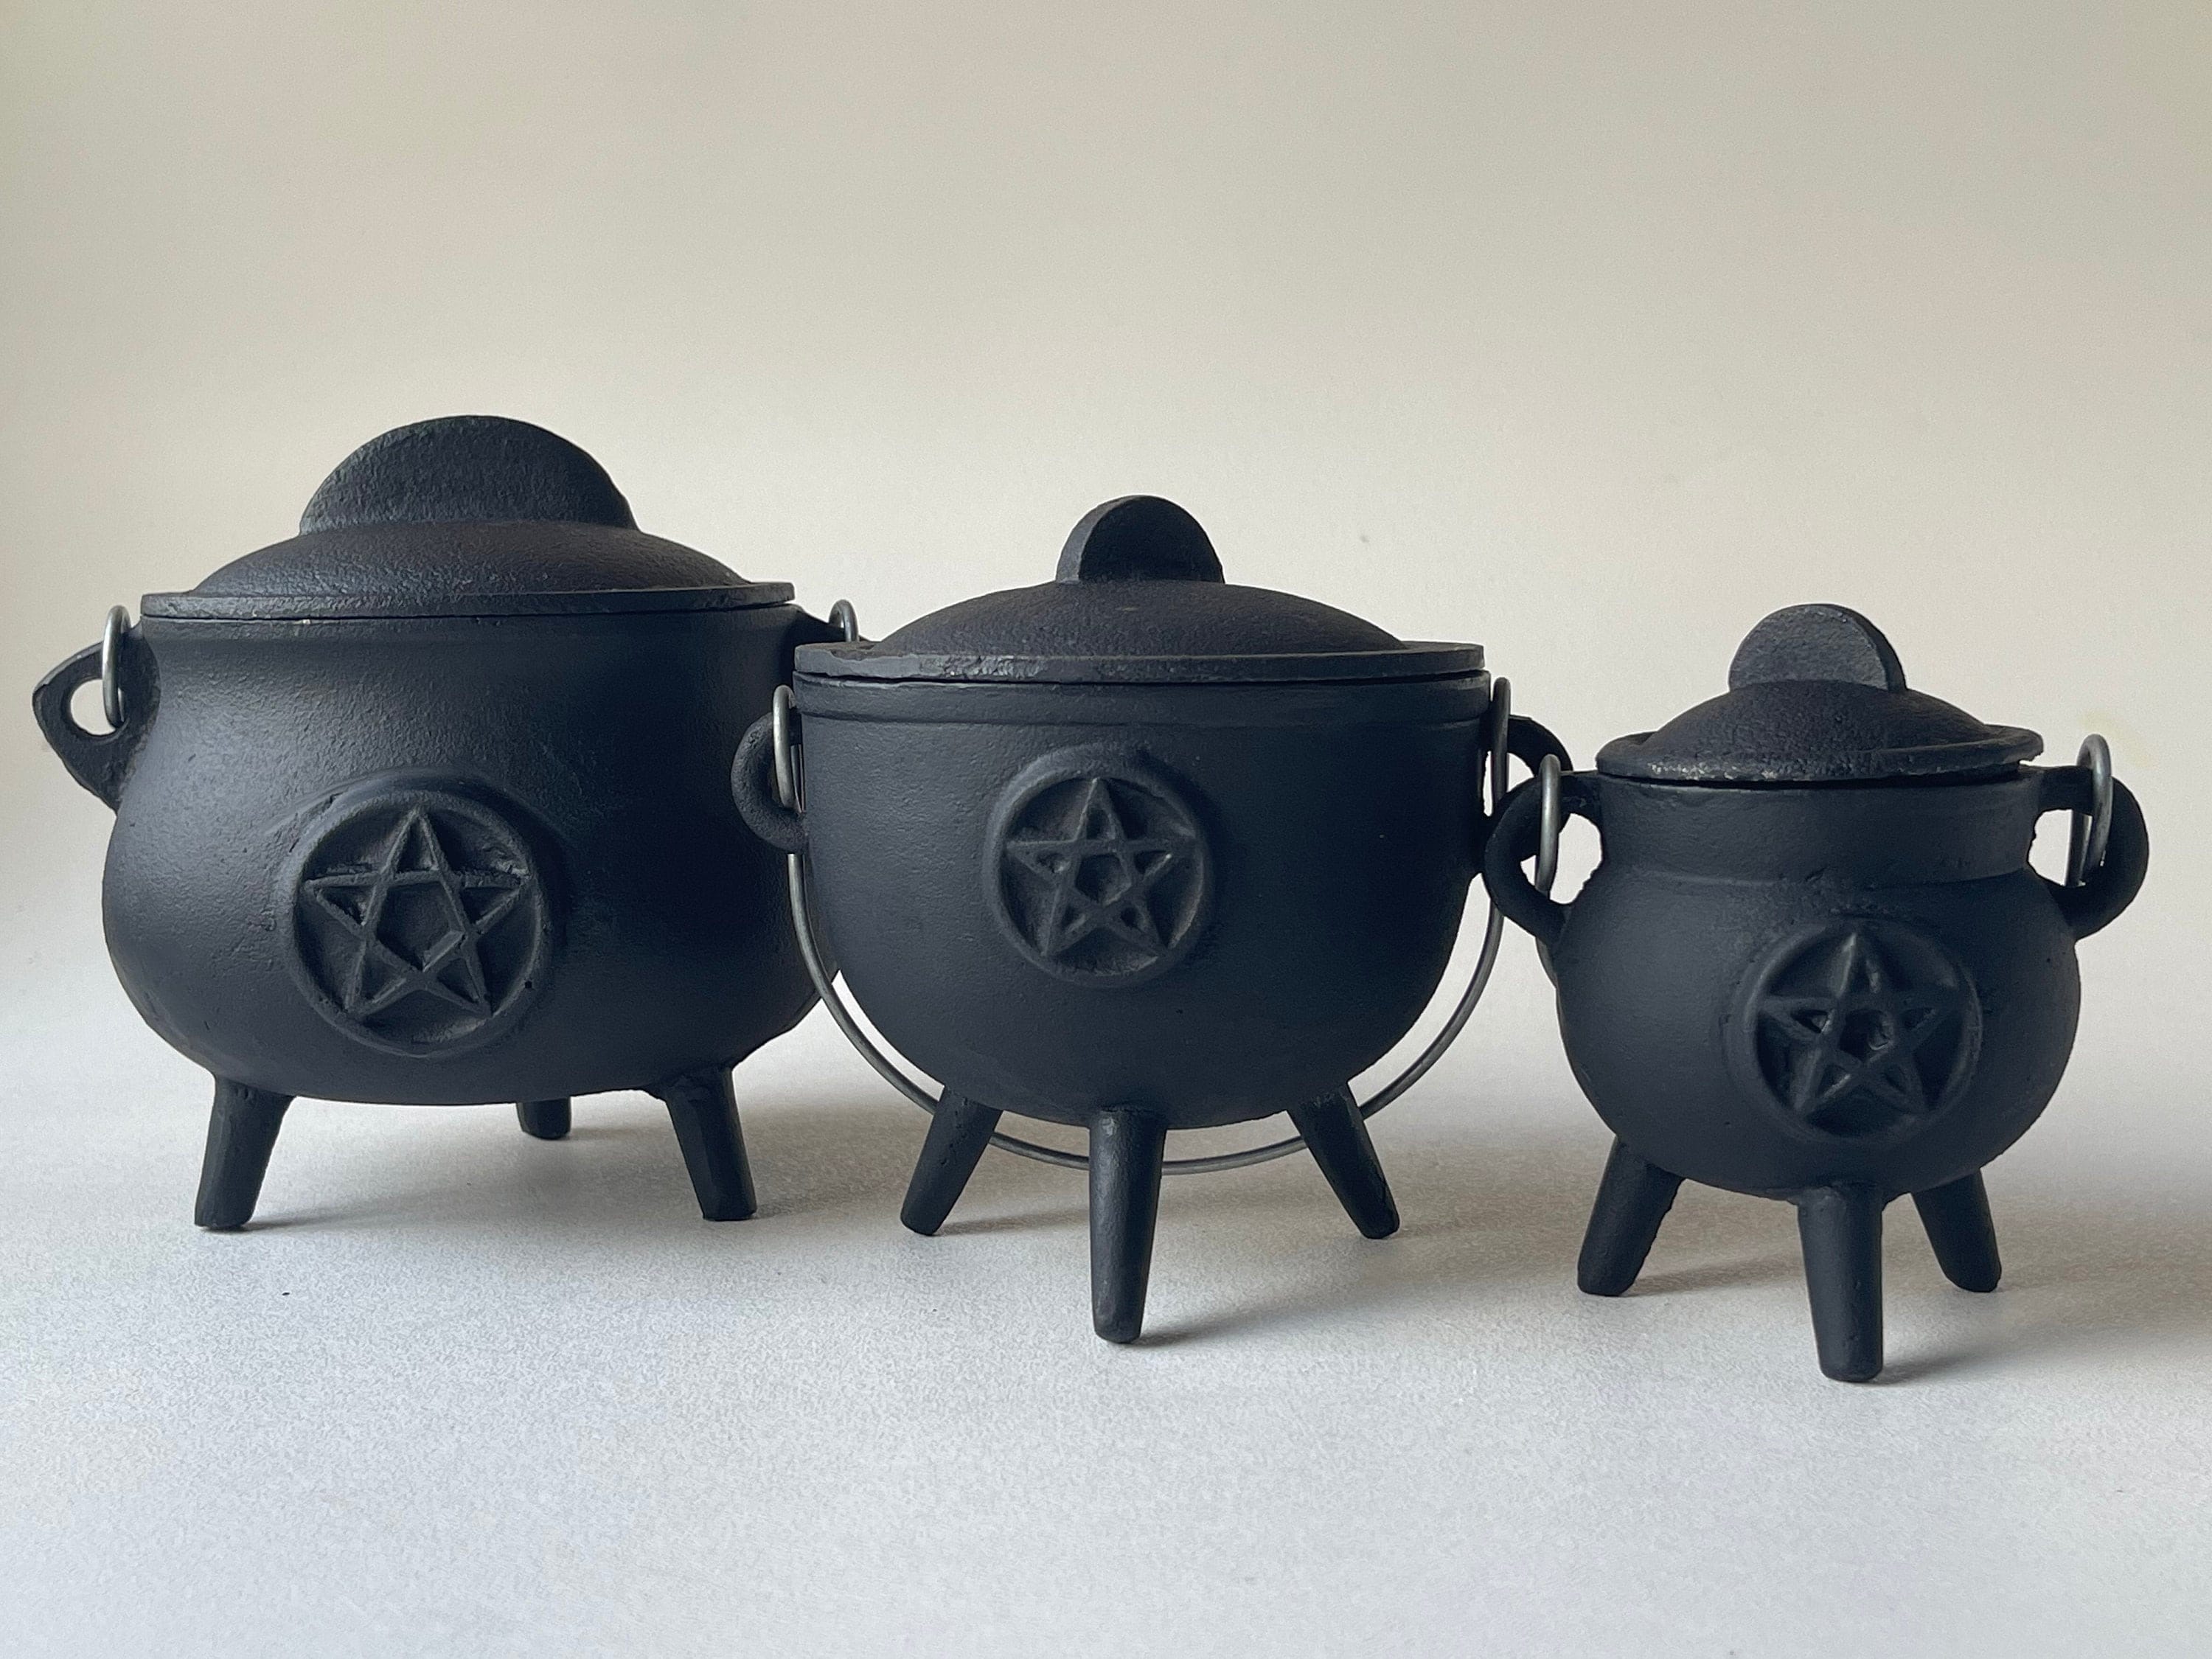 These pot and pan handle covers. : r/theyknew